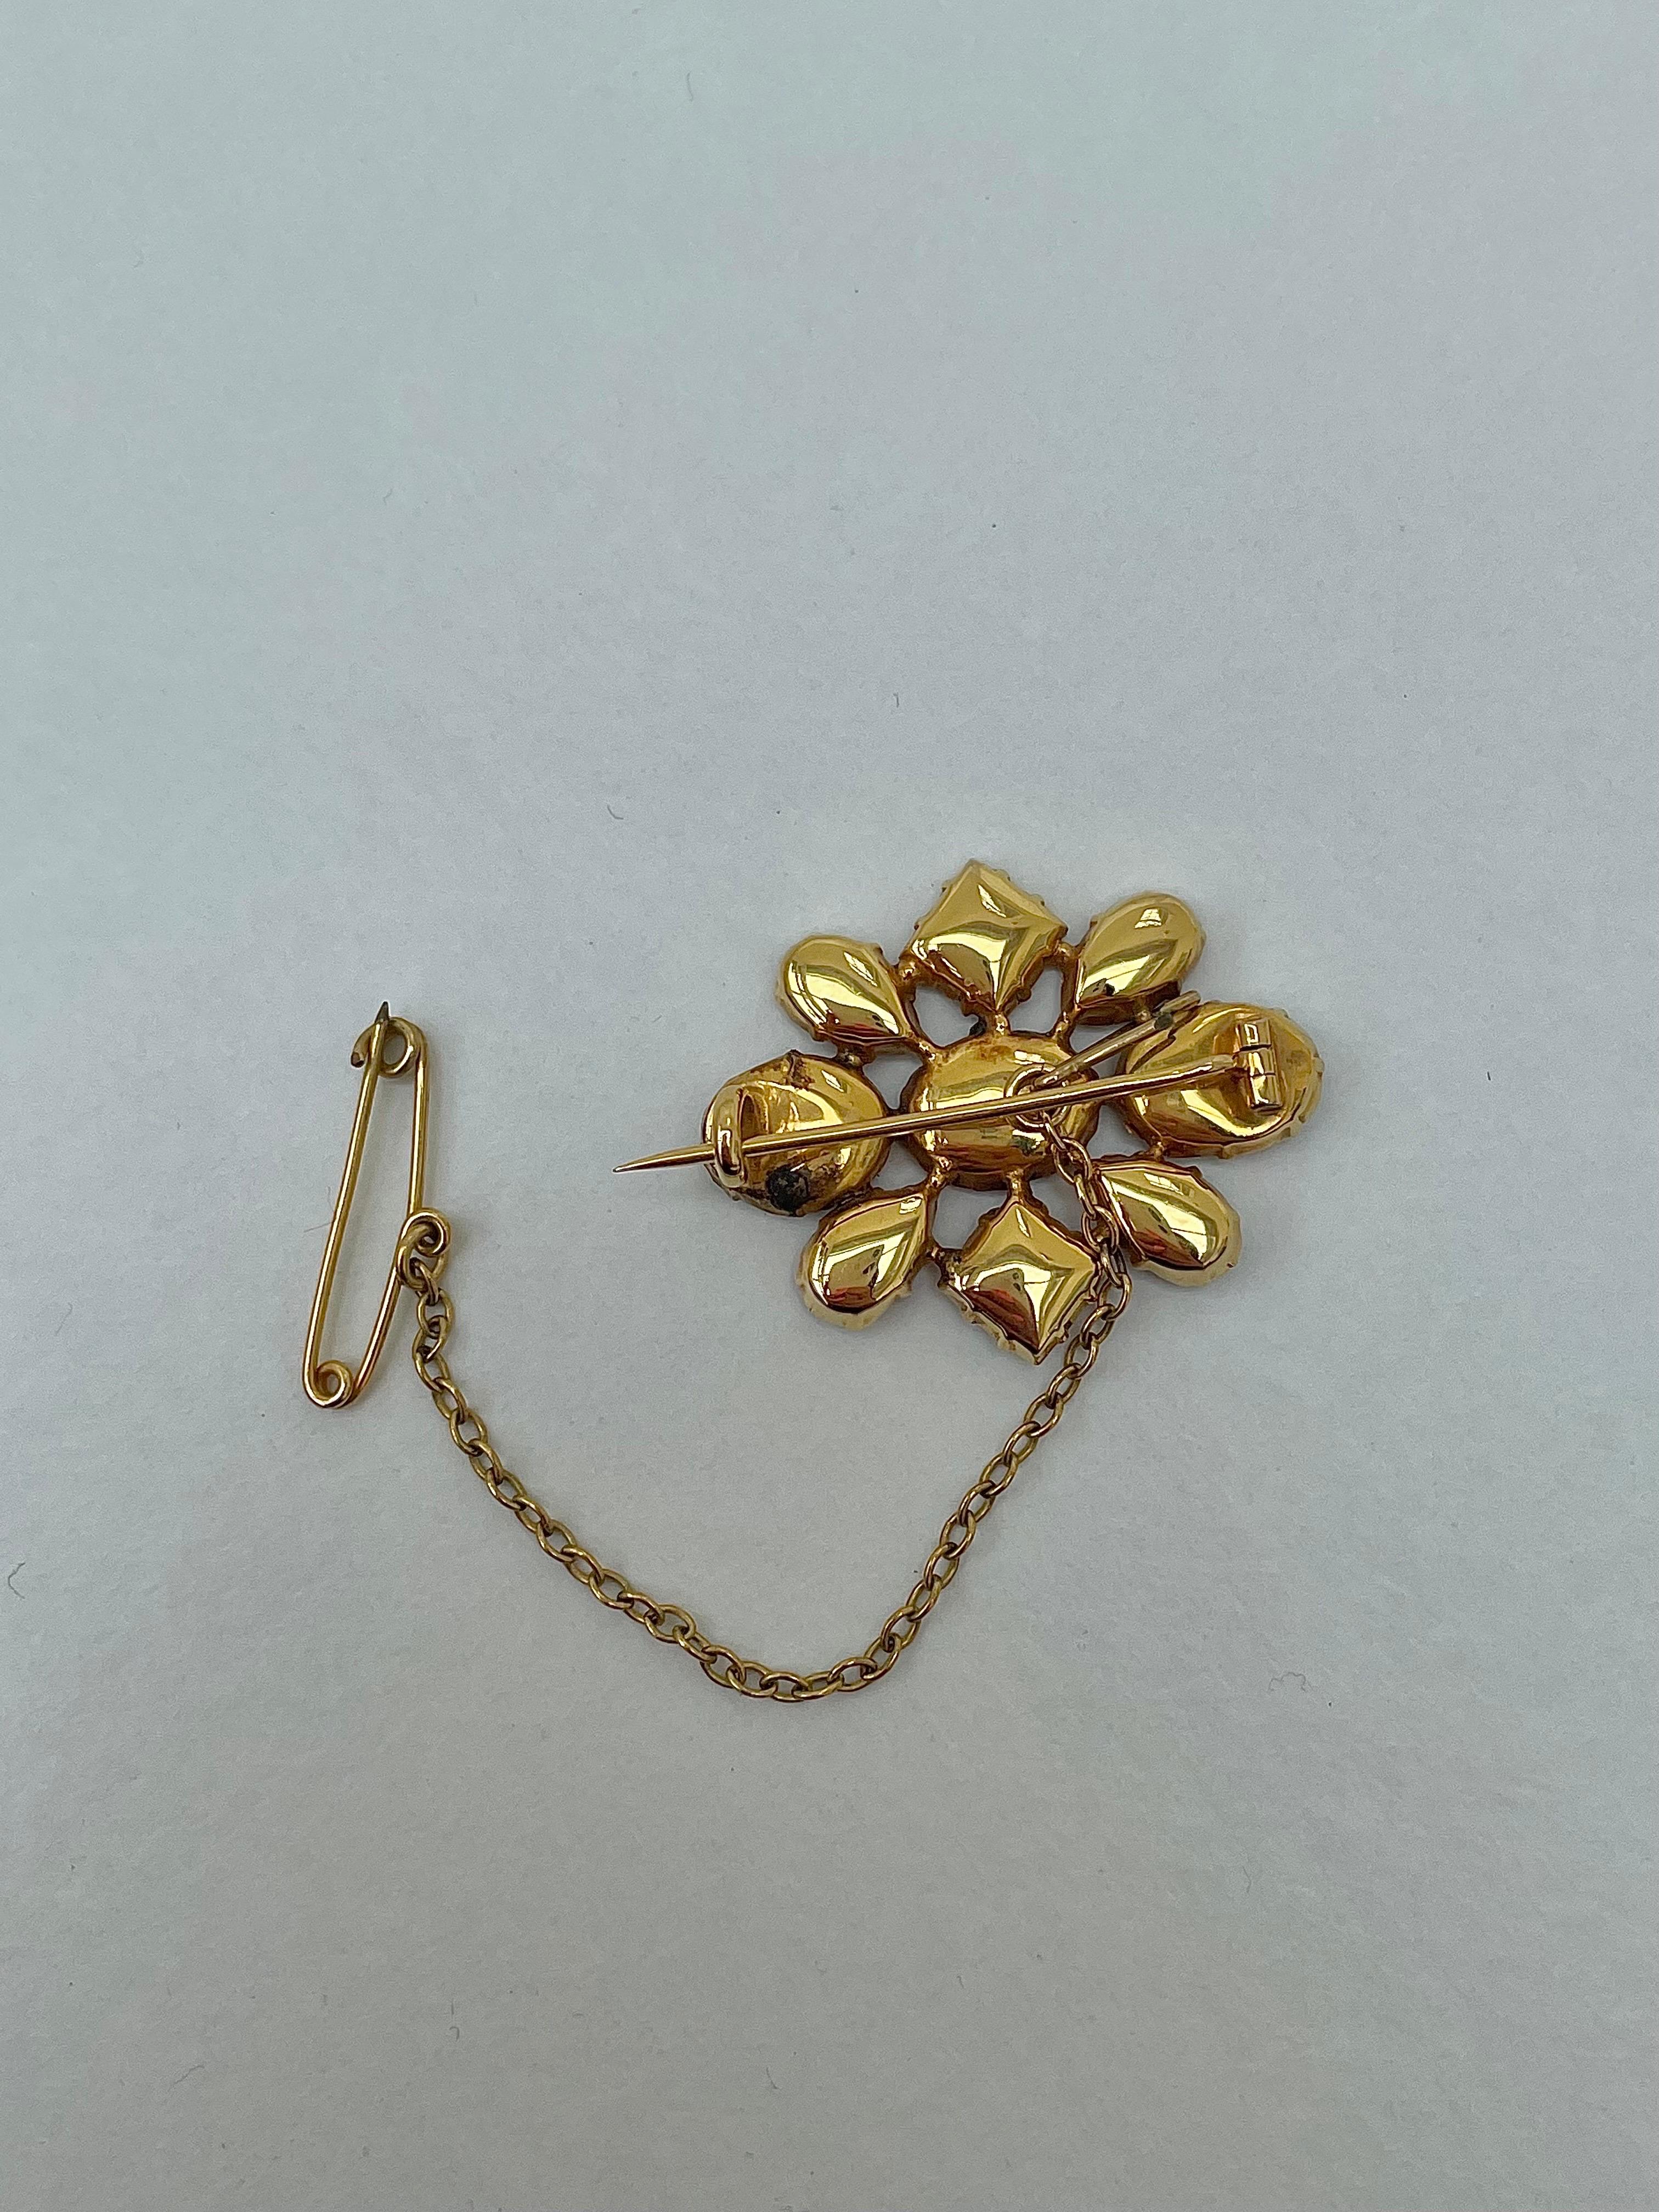 Original Antique Boxed Georgian Flat Cut Garnet Brooch 

Set in yellow gold with original safety chain attached 

the most beautiful flower garnet brooch, she’s truly perfect! 

The item comes with the box!

Measurements: weight 2.76g, length